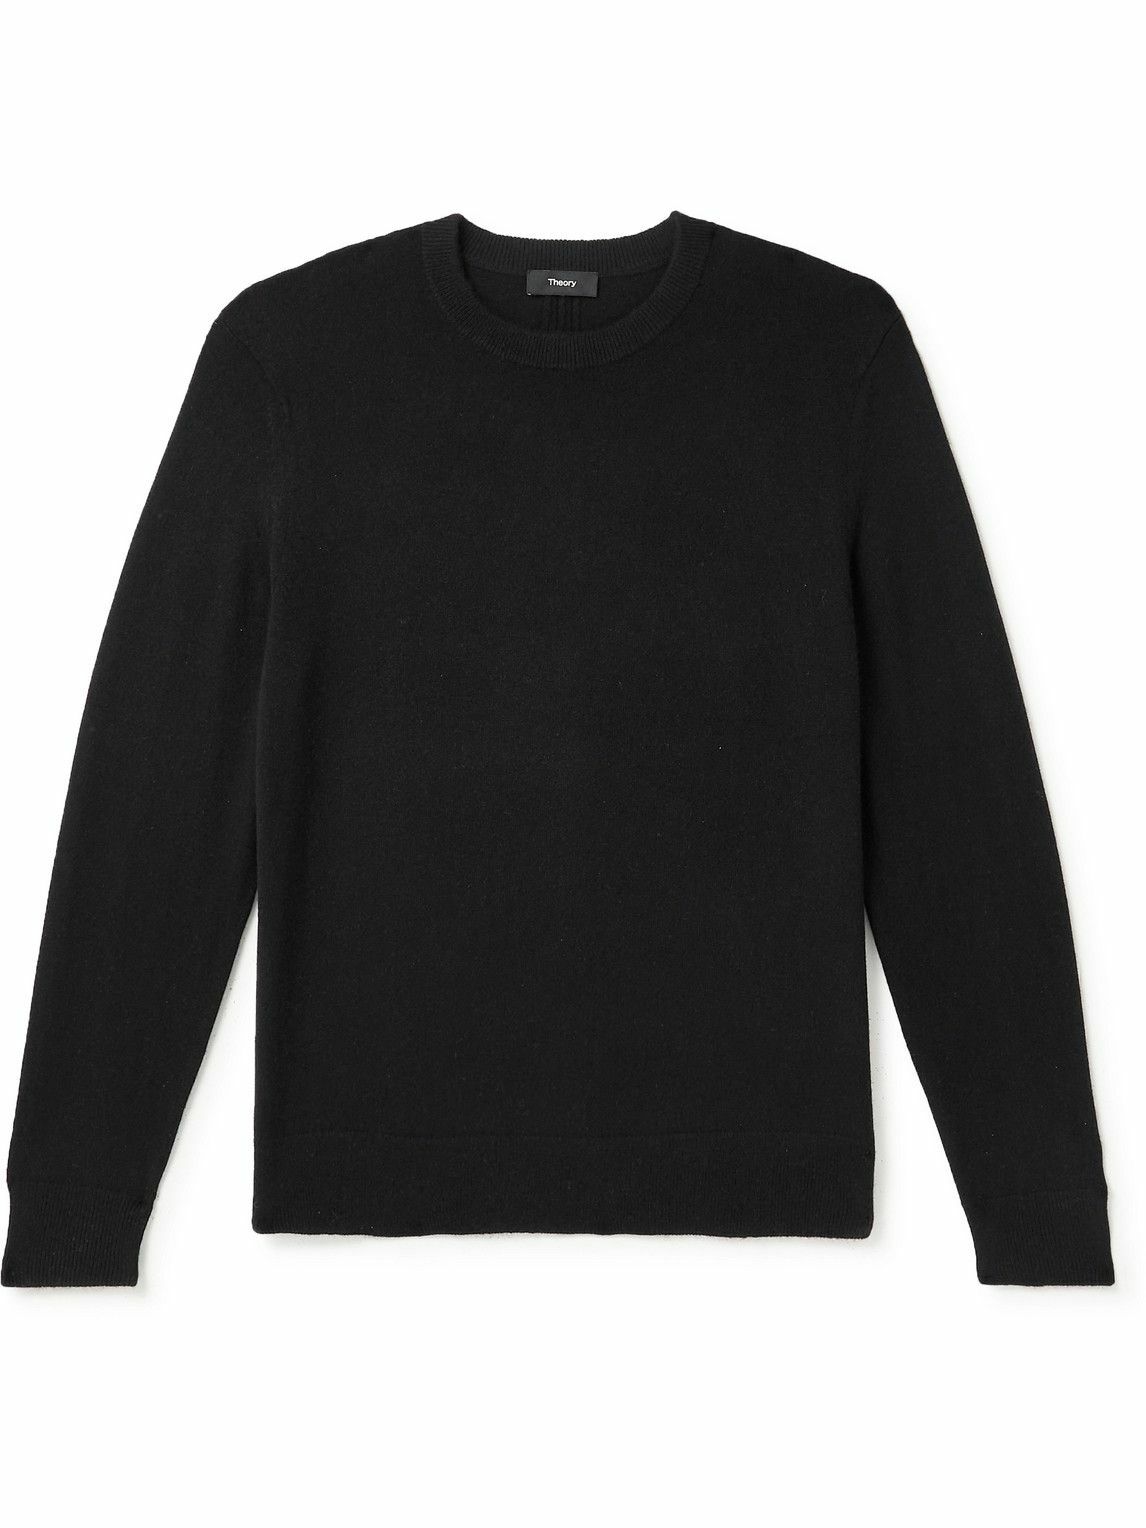 Theory - Hilles Cashmere Sweater - Black Theory